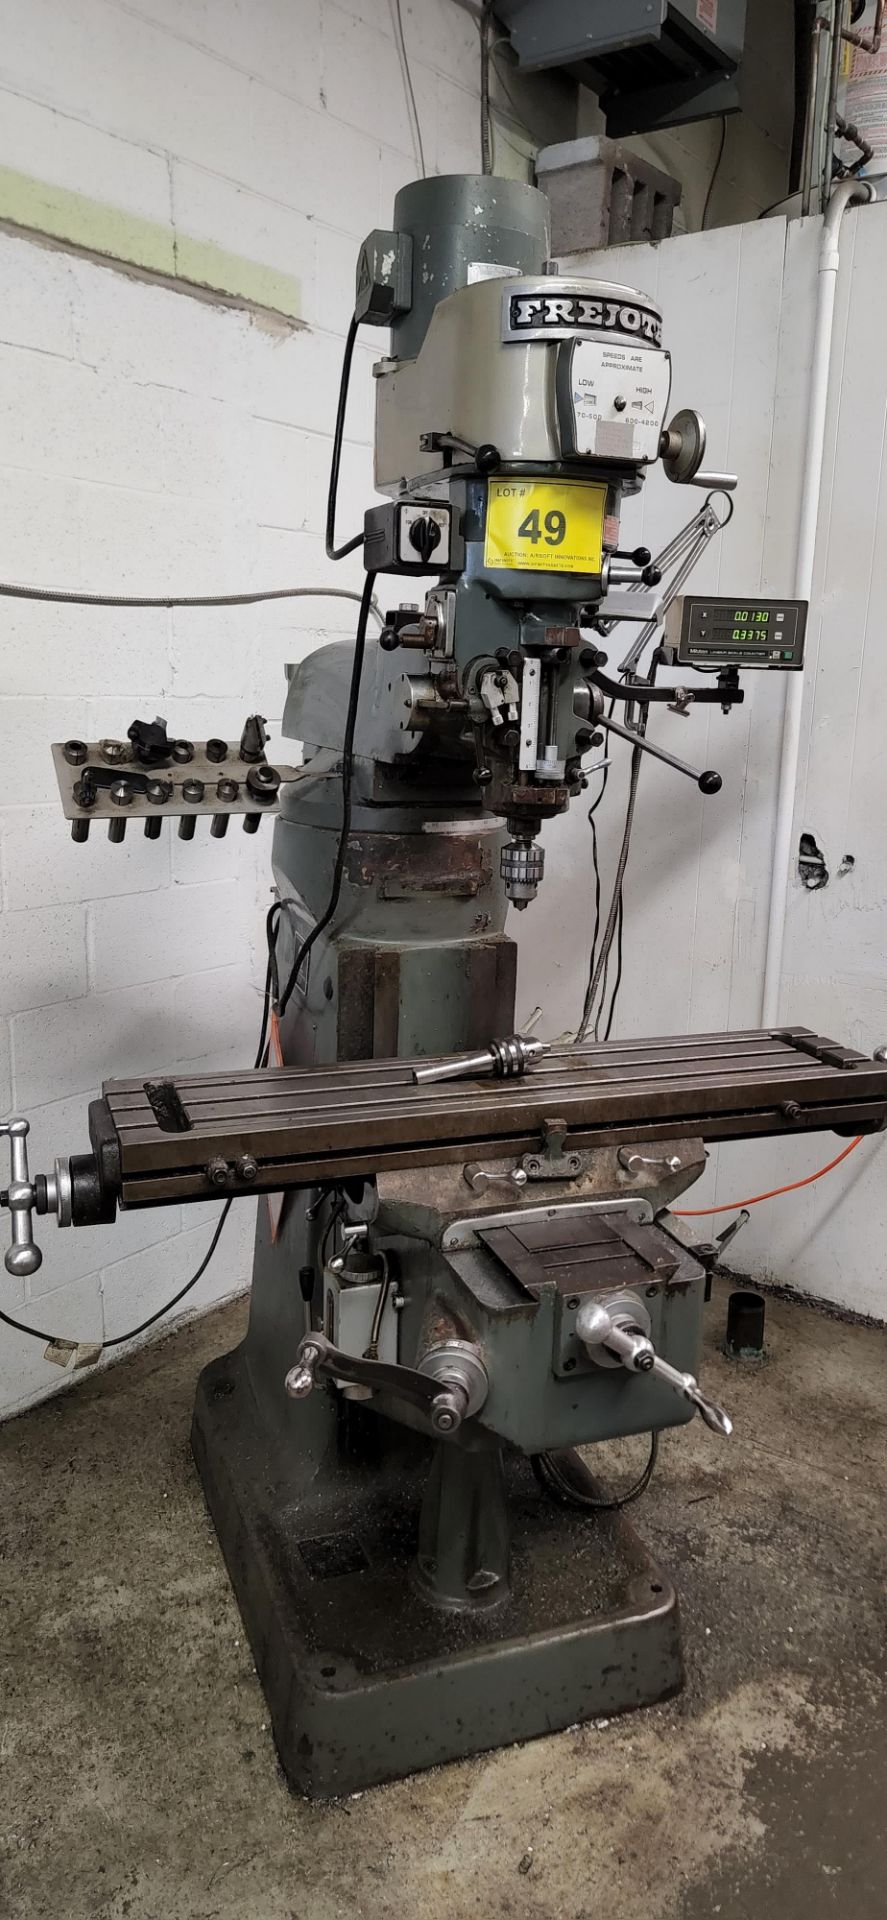 FREJOTH VERTICAL MILLING MACHINE, MITUTOYO 2-AXIS DRO, 9” X 42” TABLE, SPEEDS TO 4,200 RPM